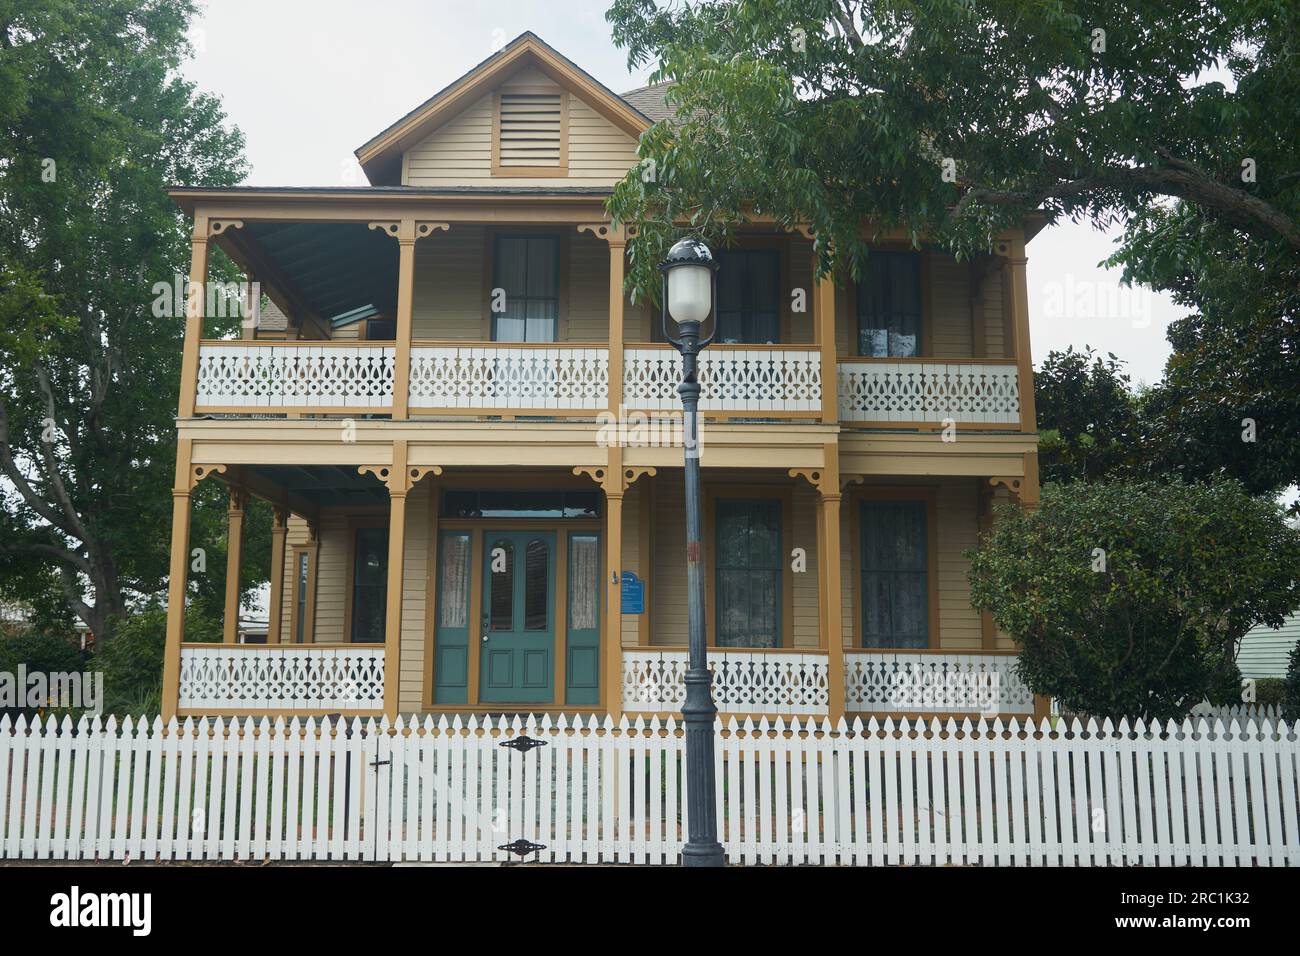 A historic French Creole style house with a wrap-around porch and a white picket fence in Pensacola, Florida. Stock Photo